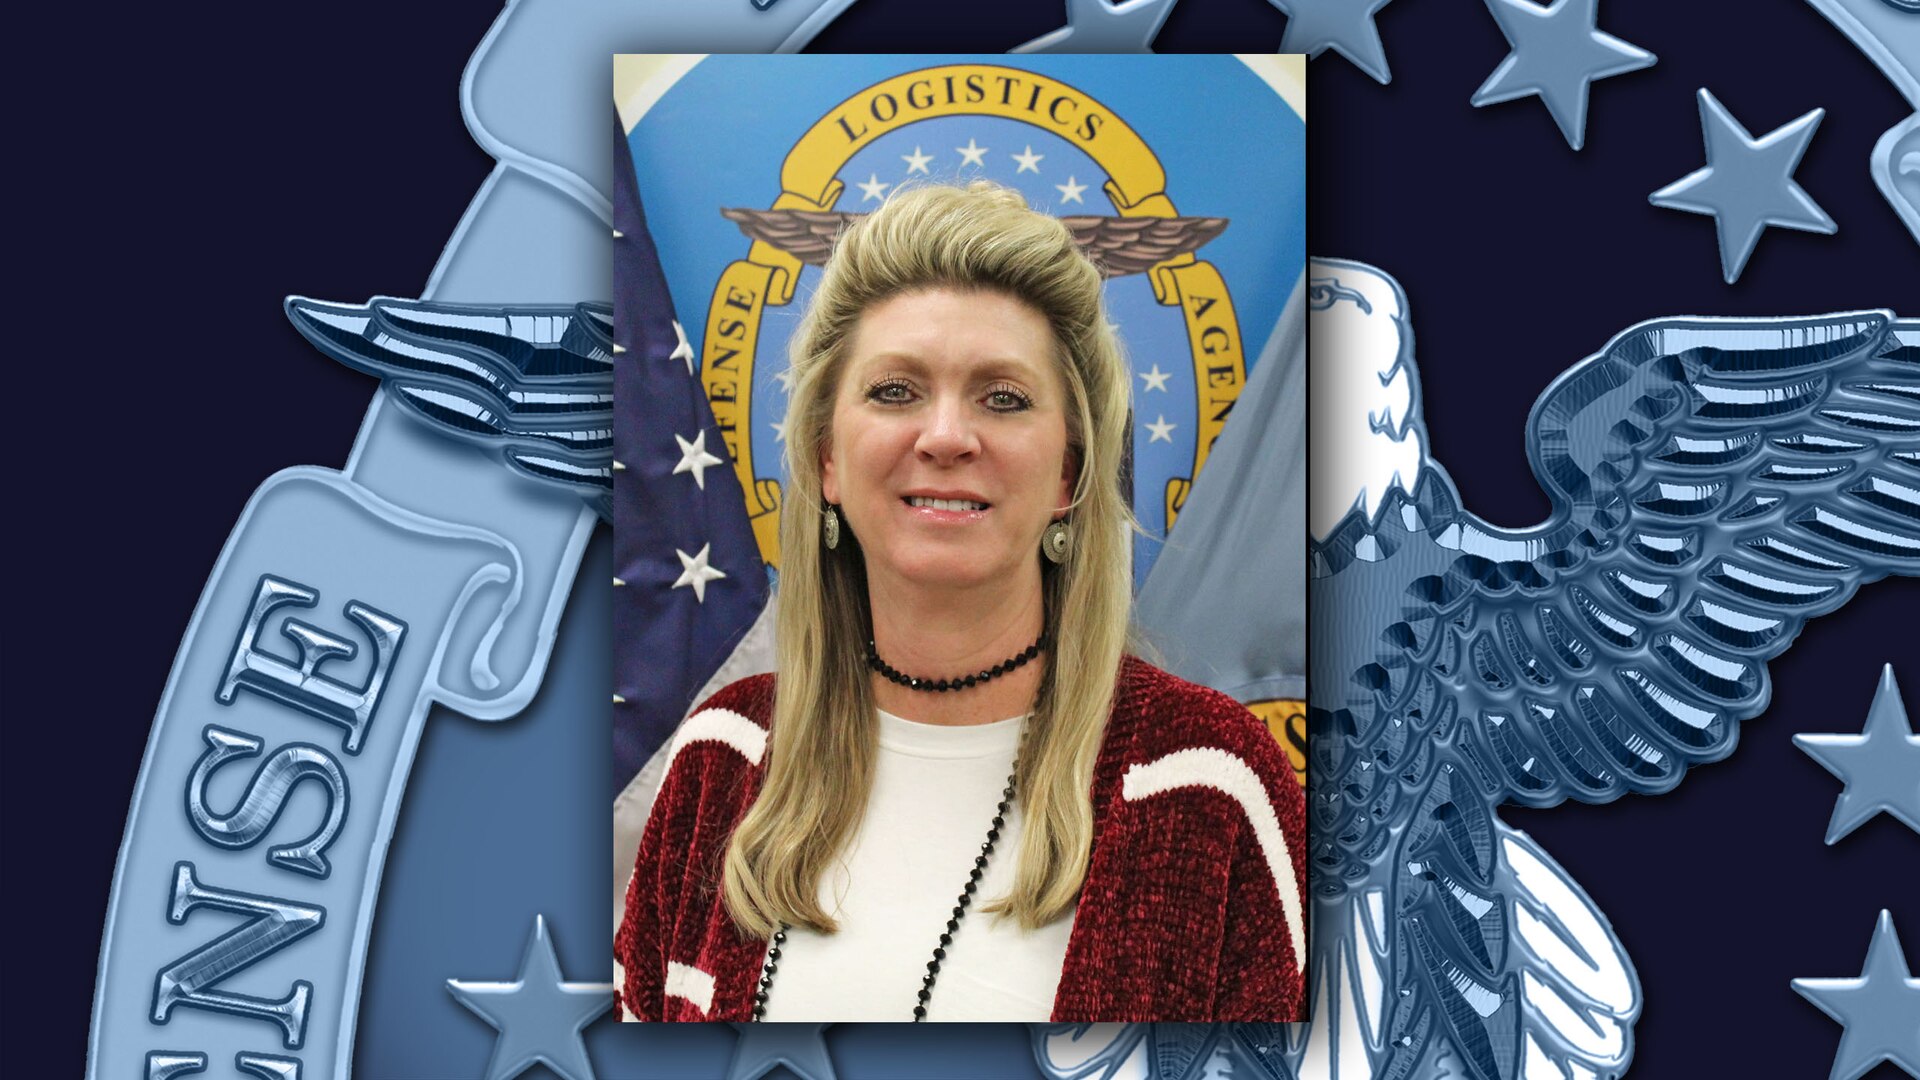 Terri Strickland is awarded the Defense Logistics Agency Distribution Special Services Civilian of the Year award